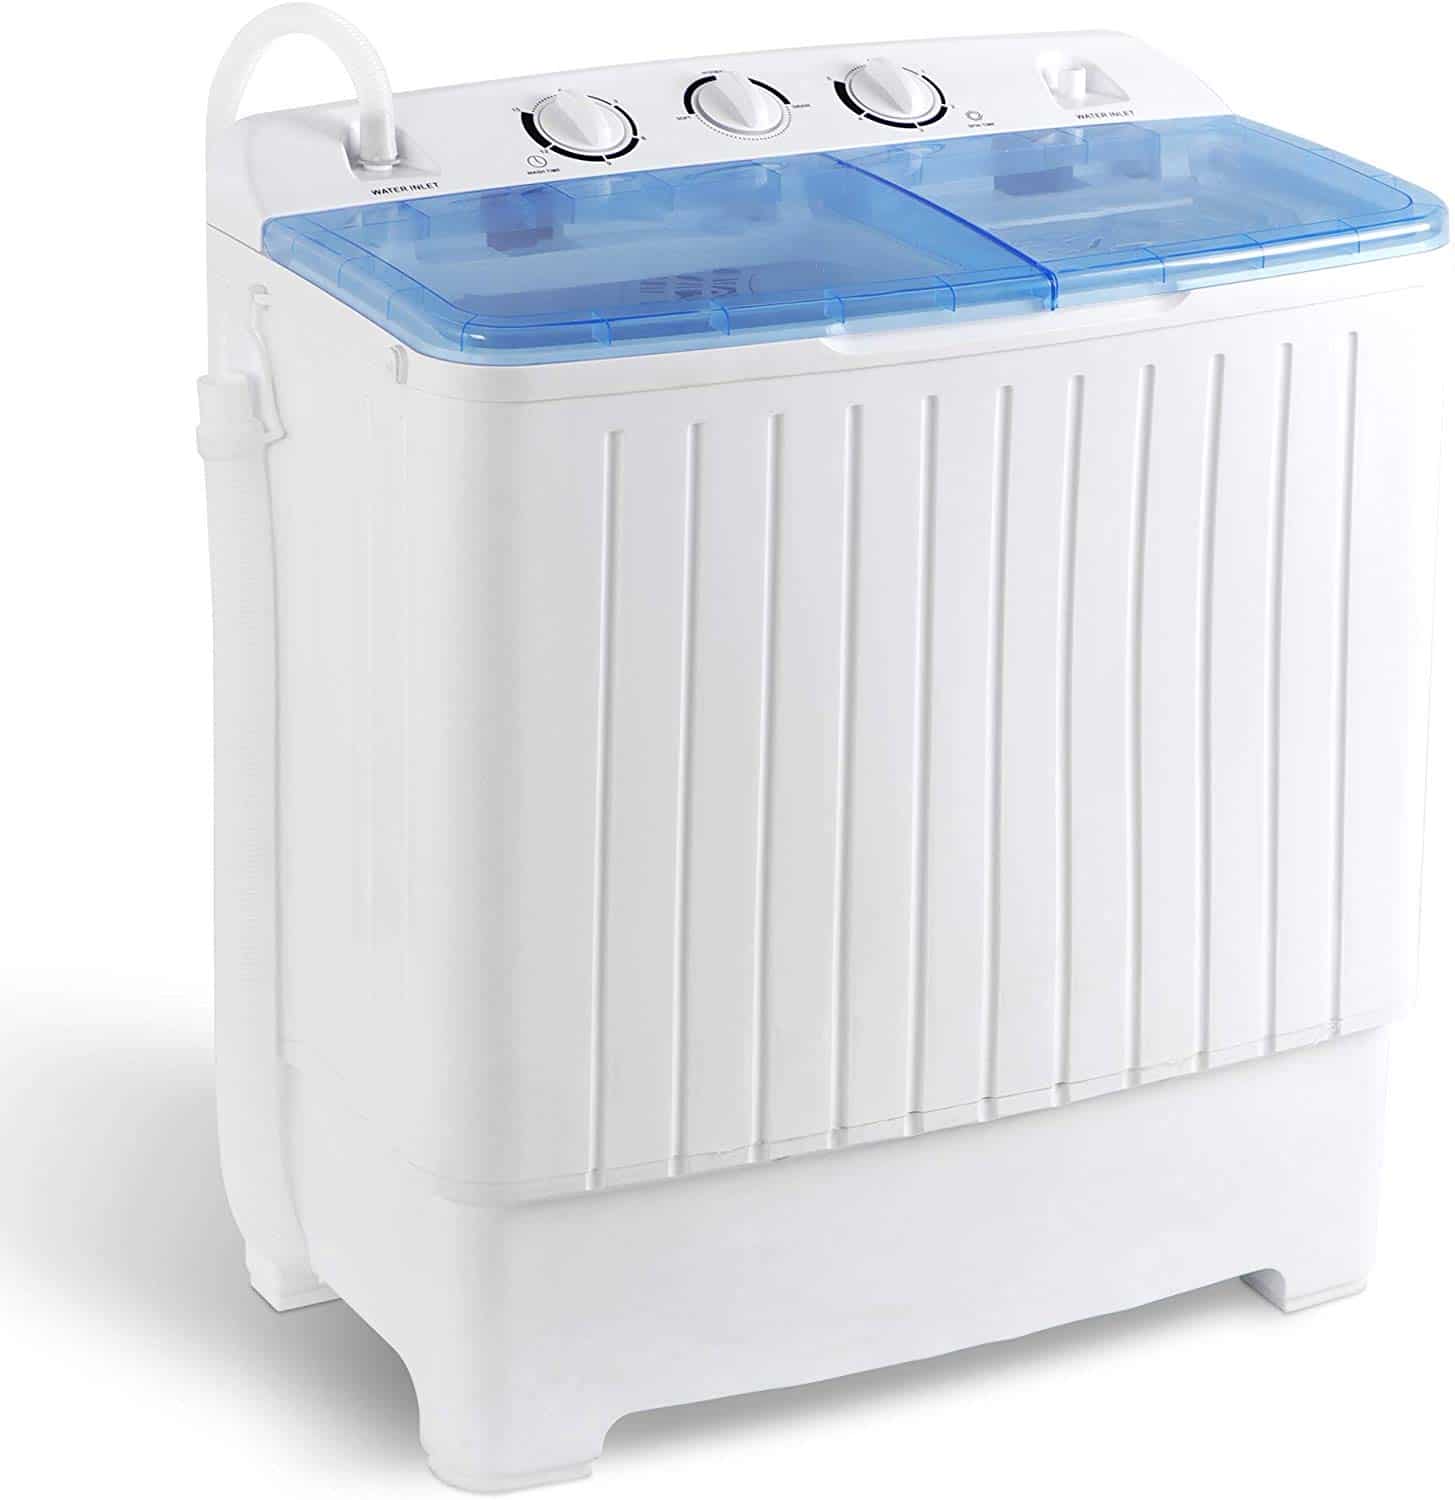 The 15 Best Portable Washing Machines of 2022